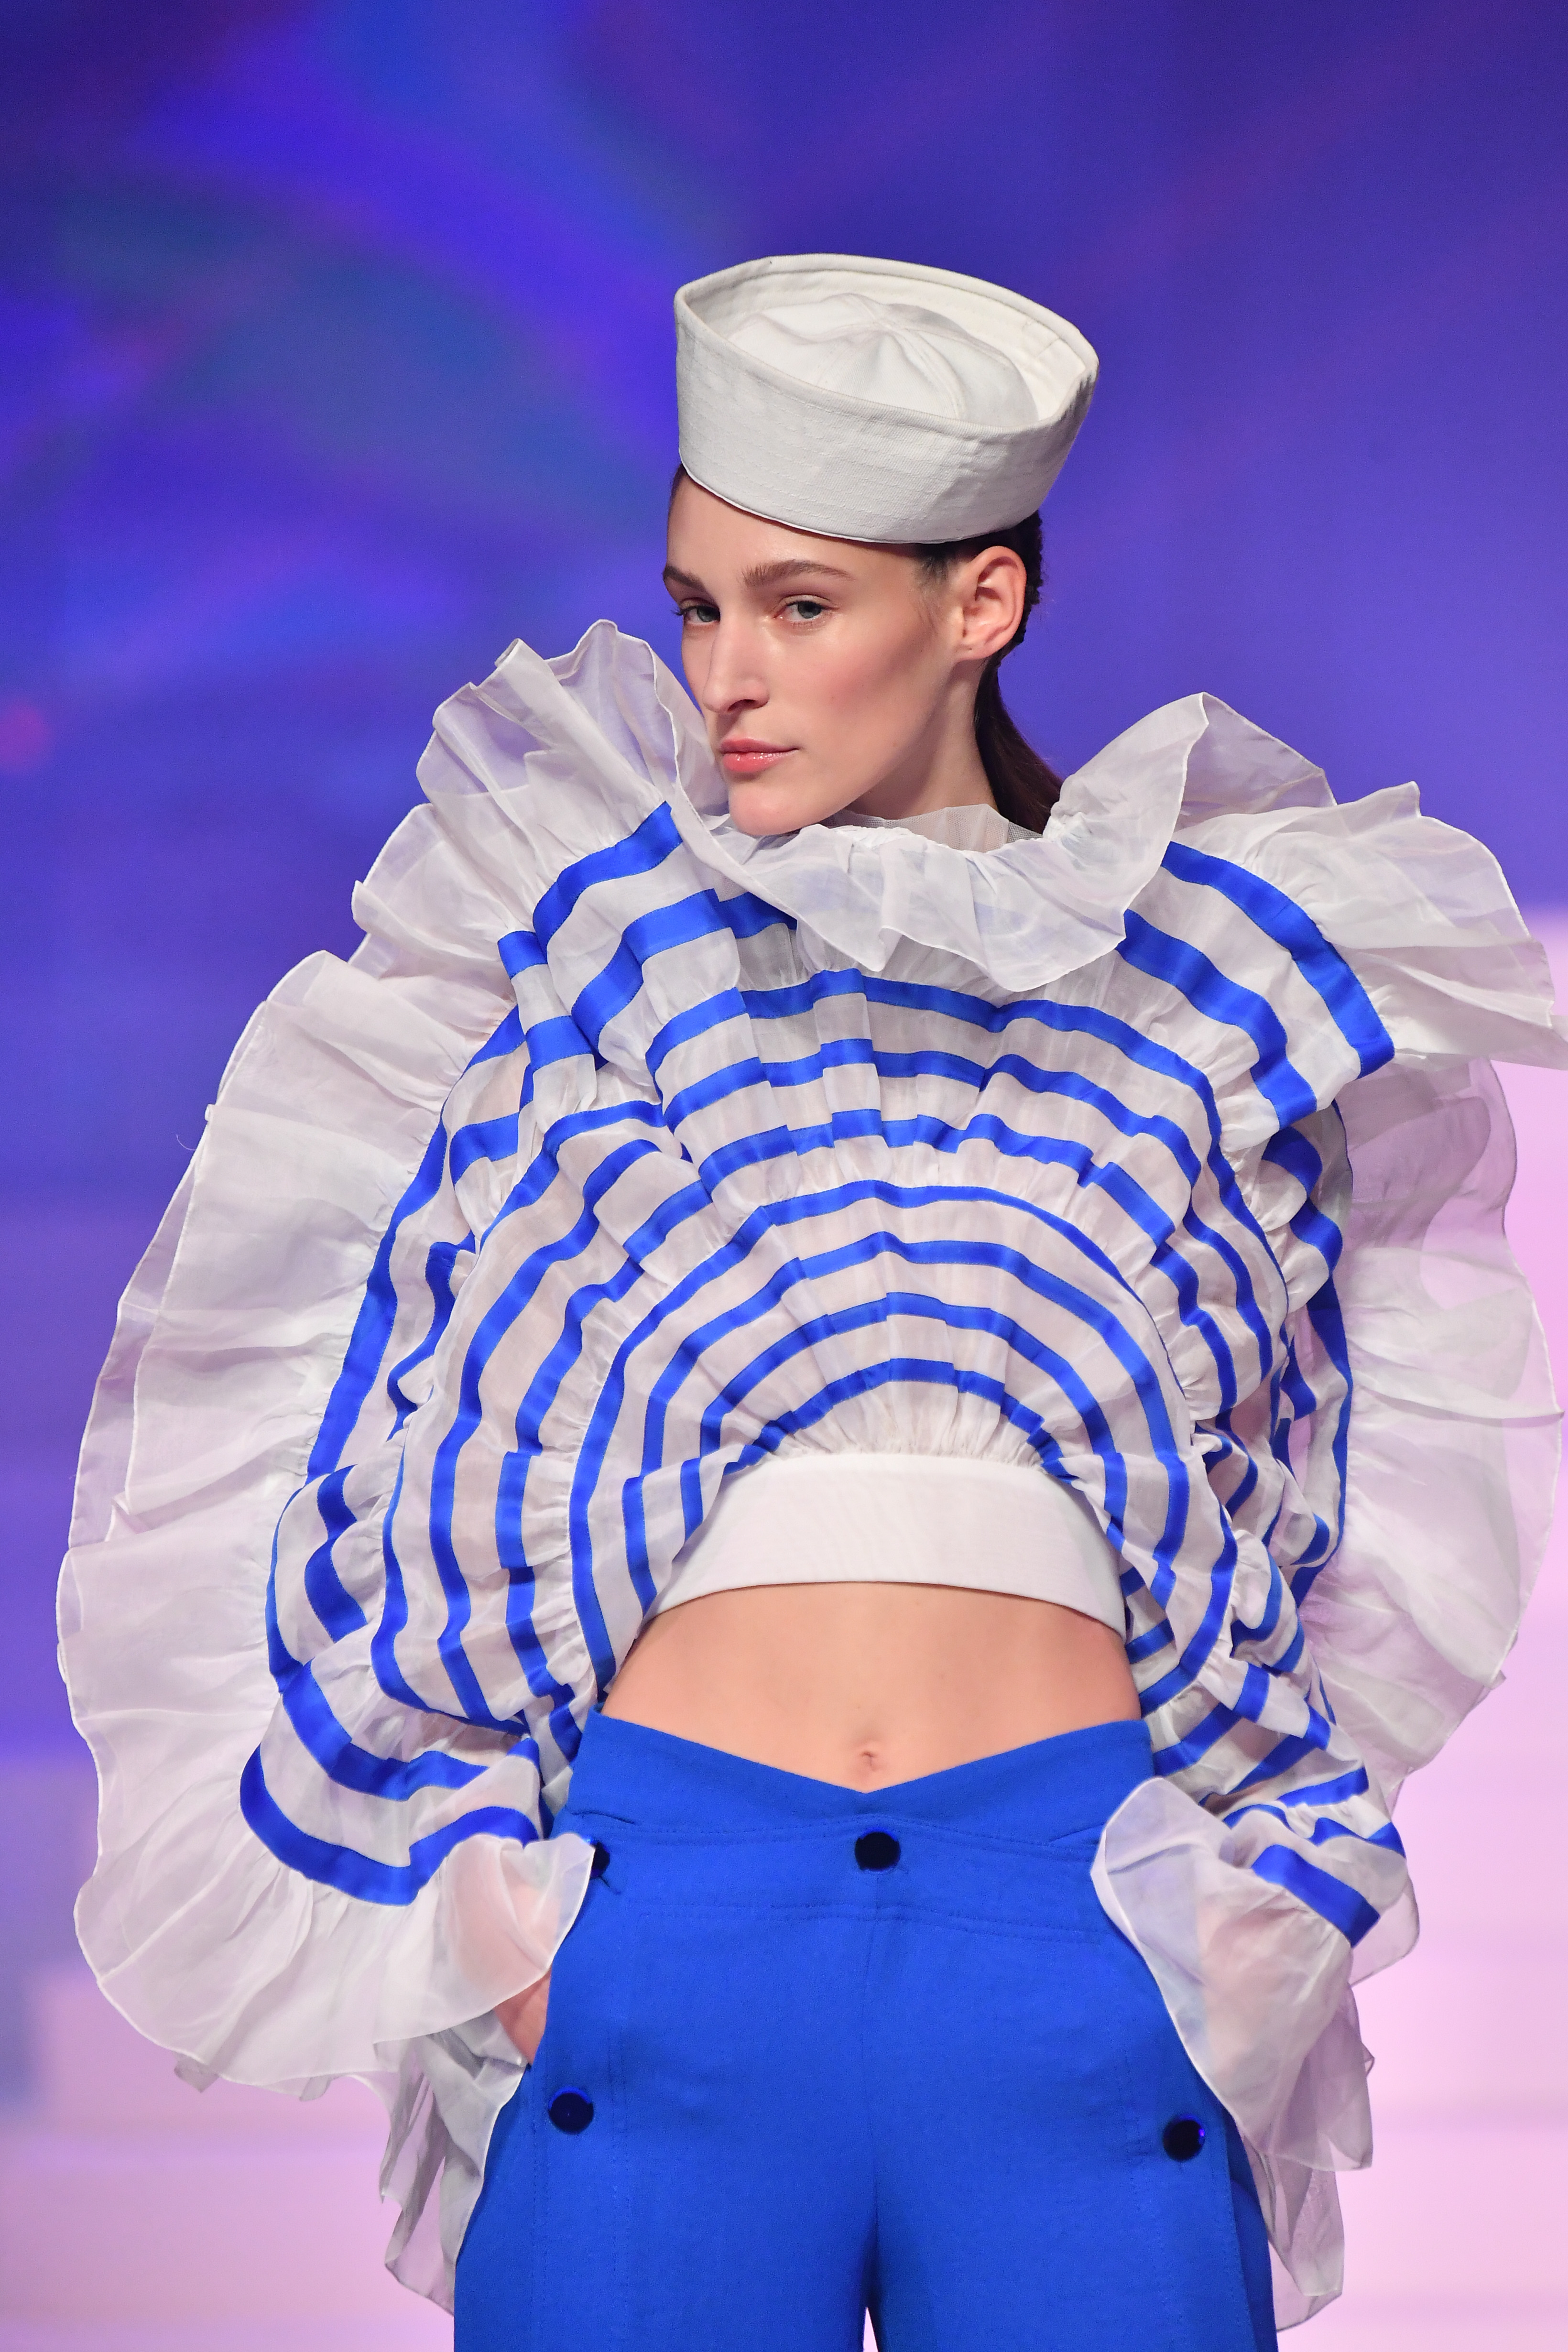 Jean-Paul Gaultier bows out as fashion designer after 50 years